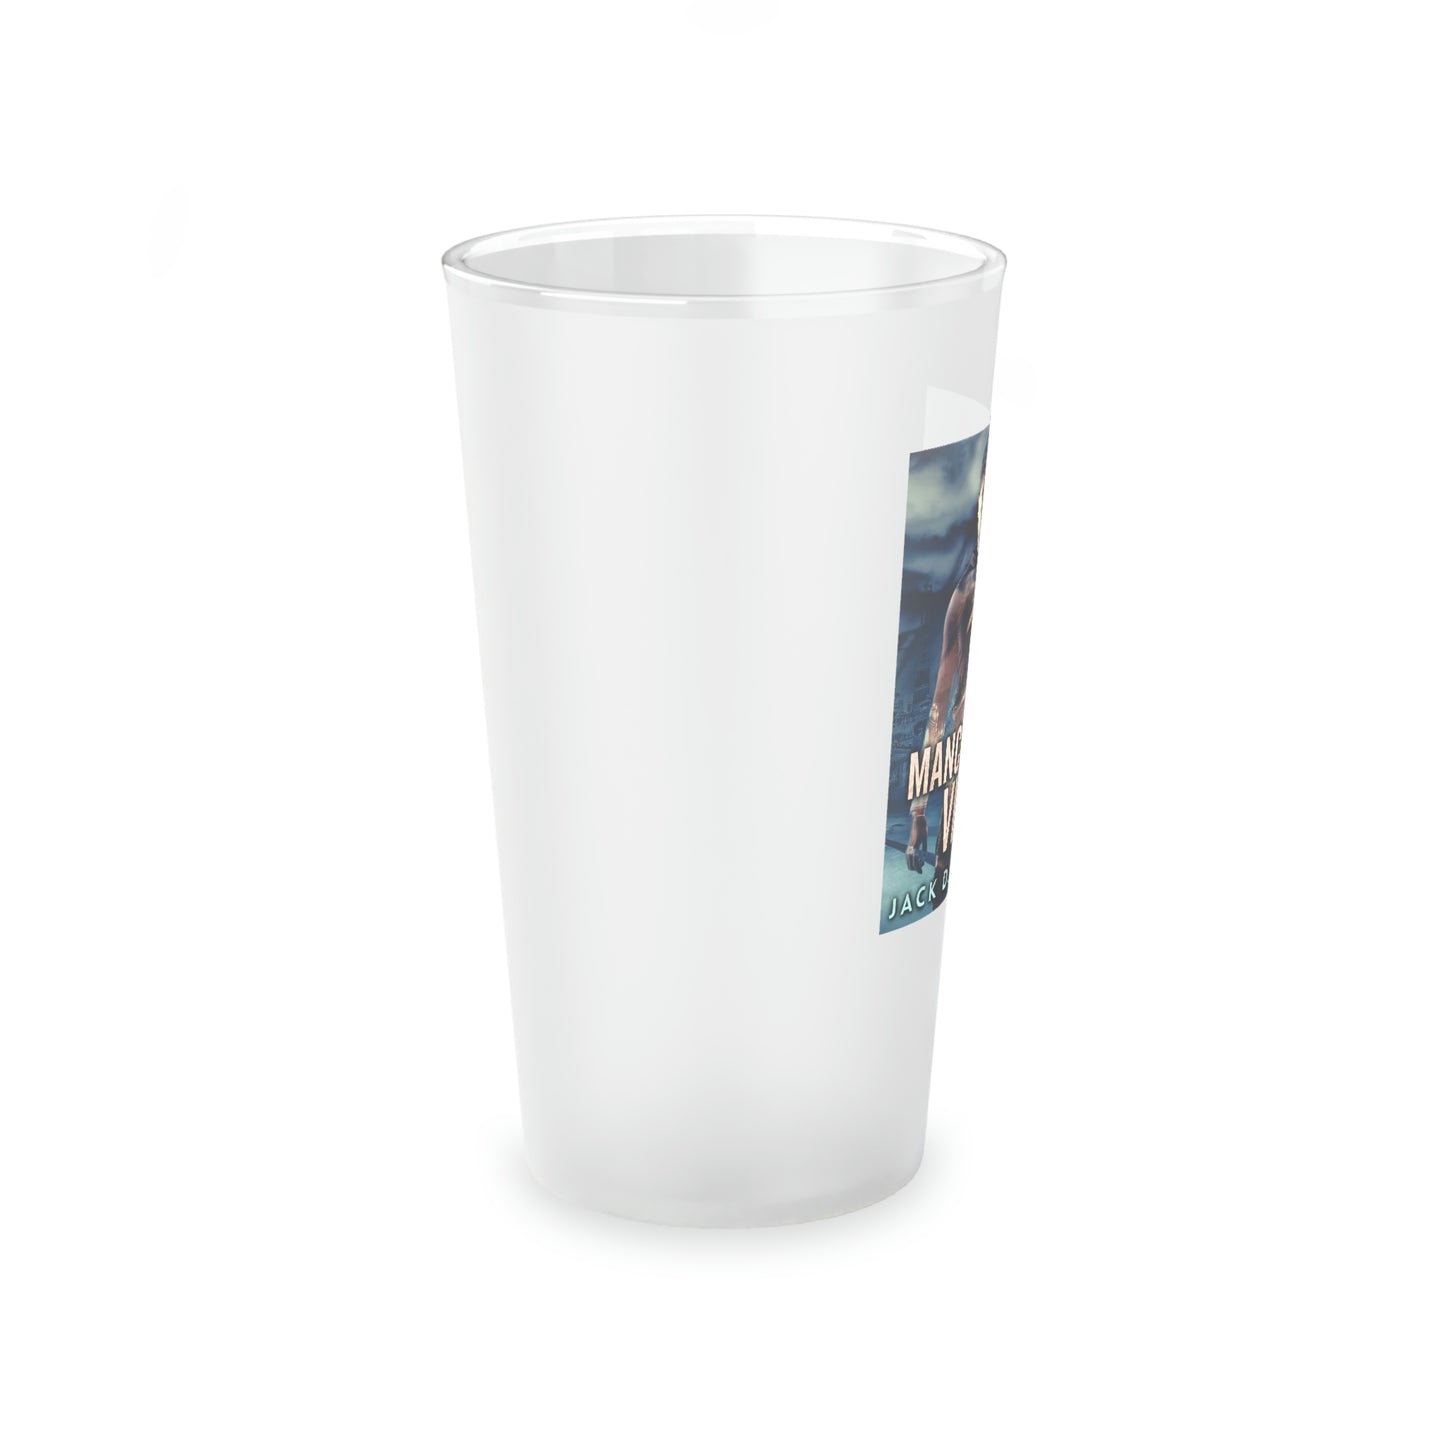 Manchester Vice - Frosted Pint Glass